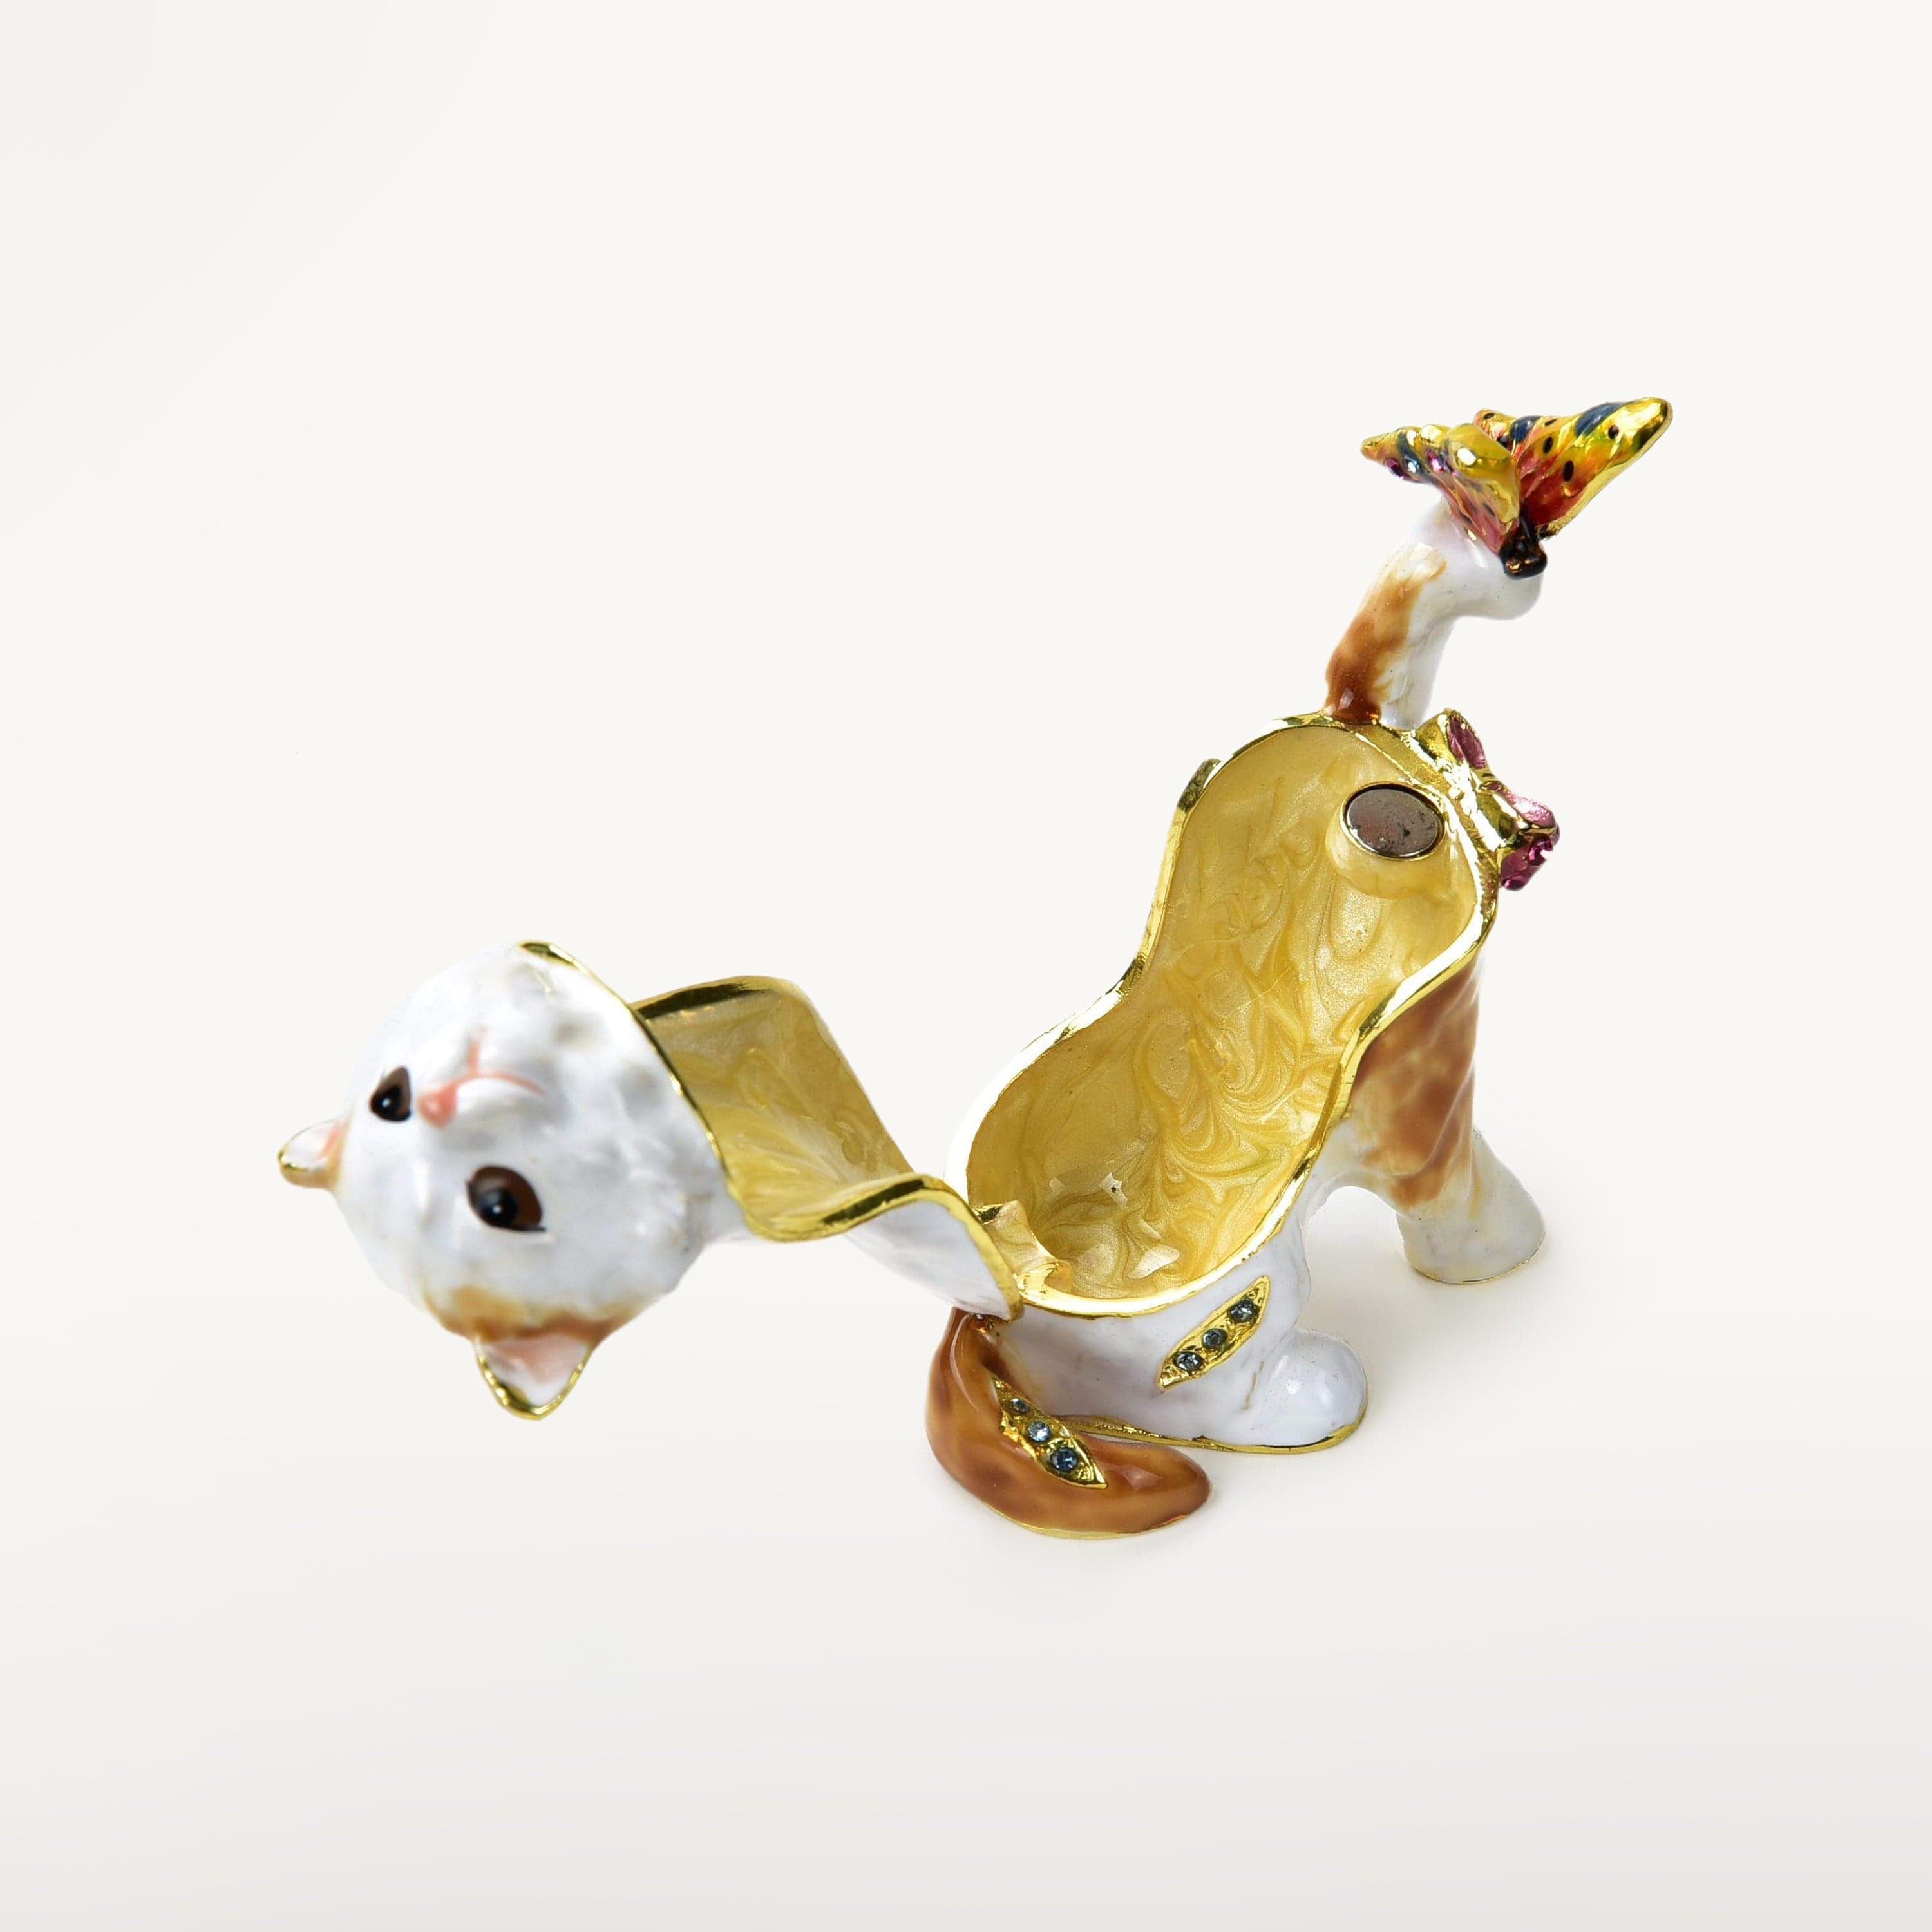 Preciosa Crystal Cat Figurine with gold whiskers